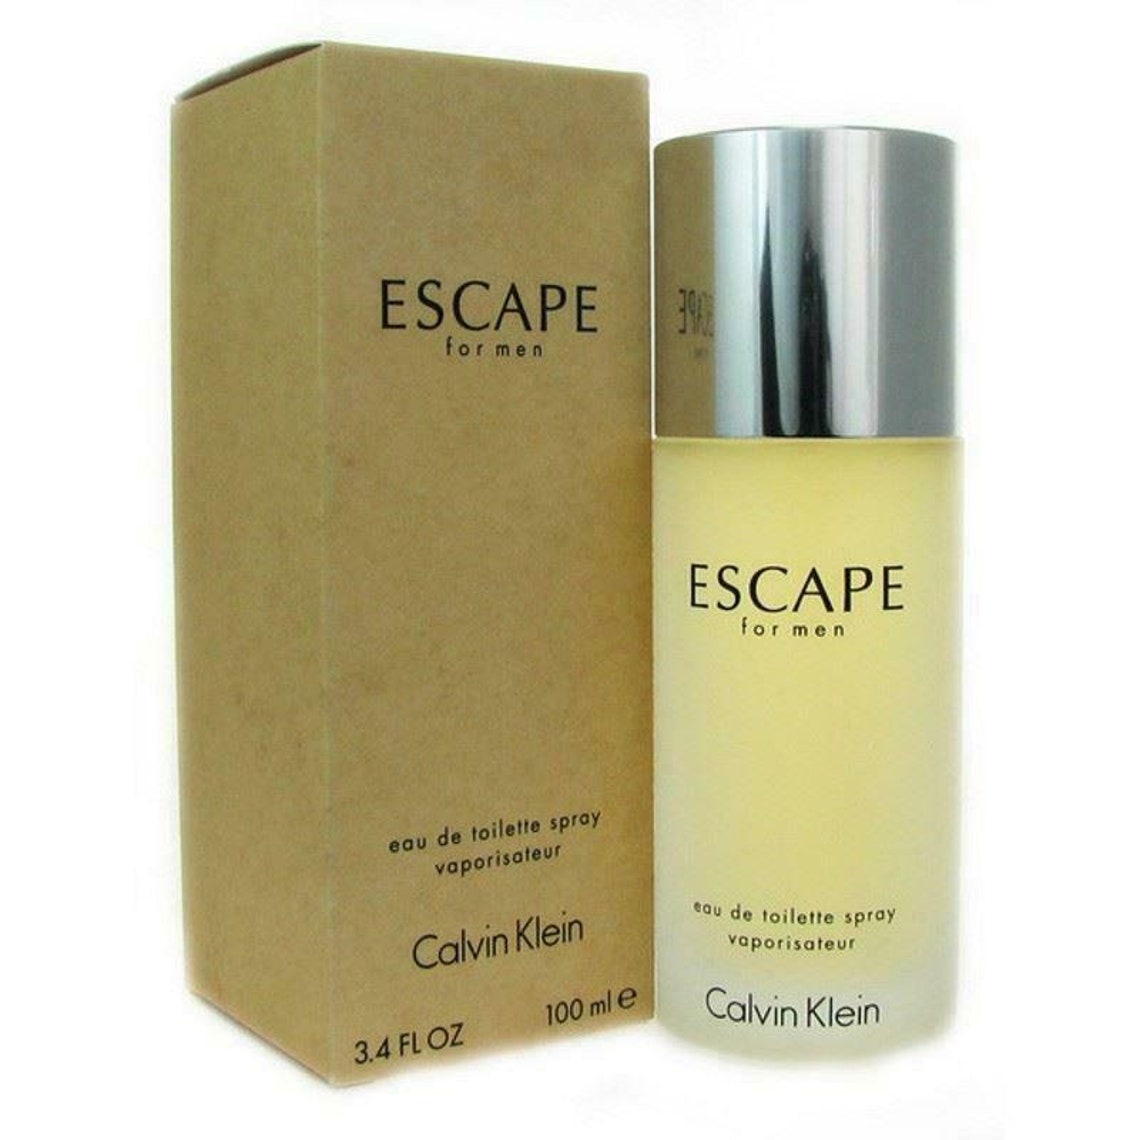 ESCAPE by Calvin Klein Cologne 3.4 oz New in Box Sealed | Etsy